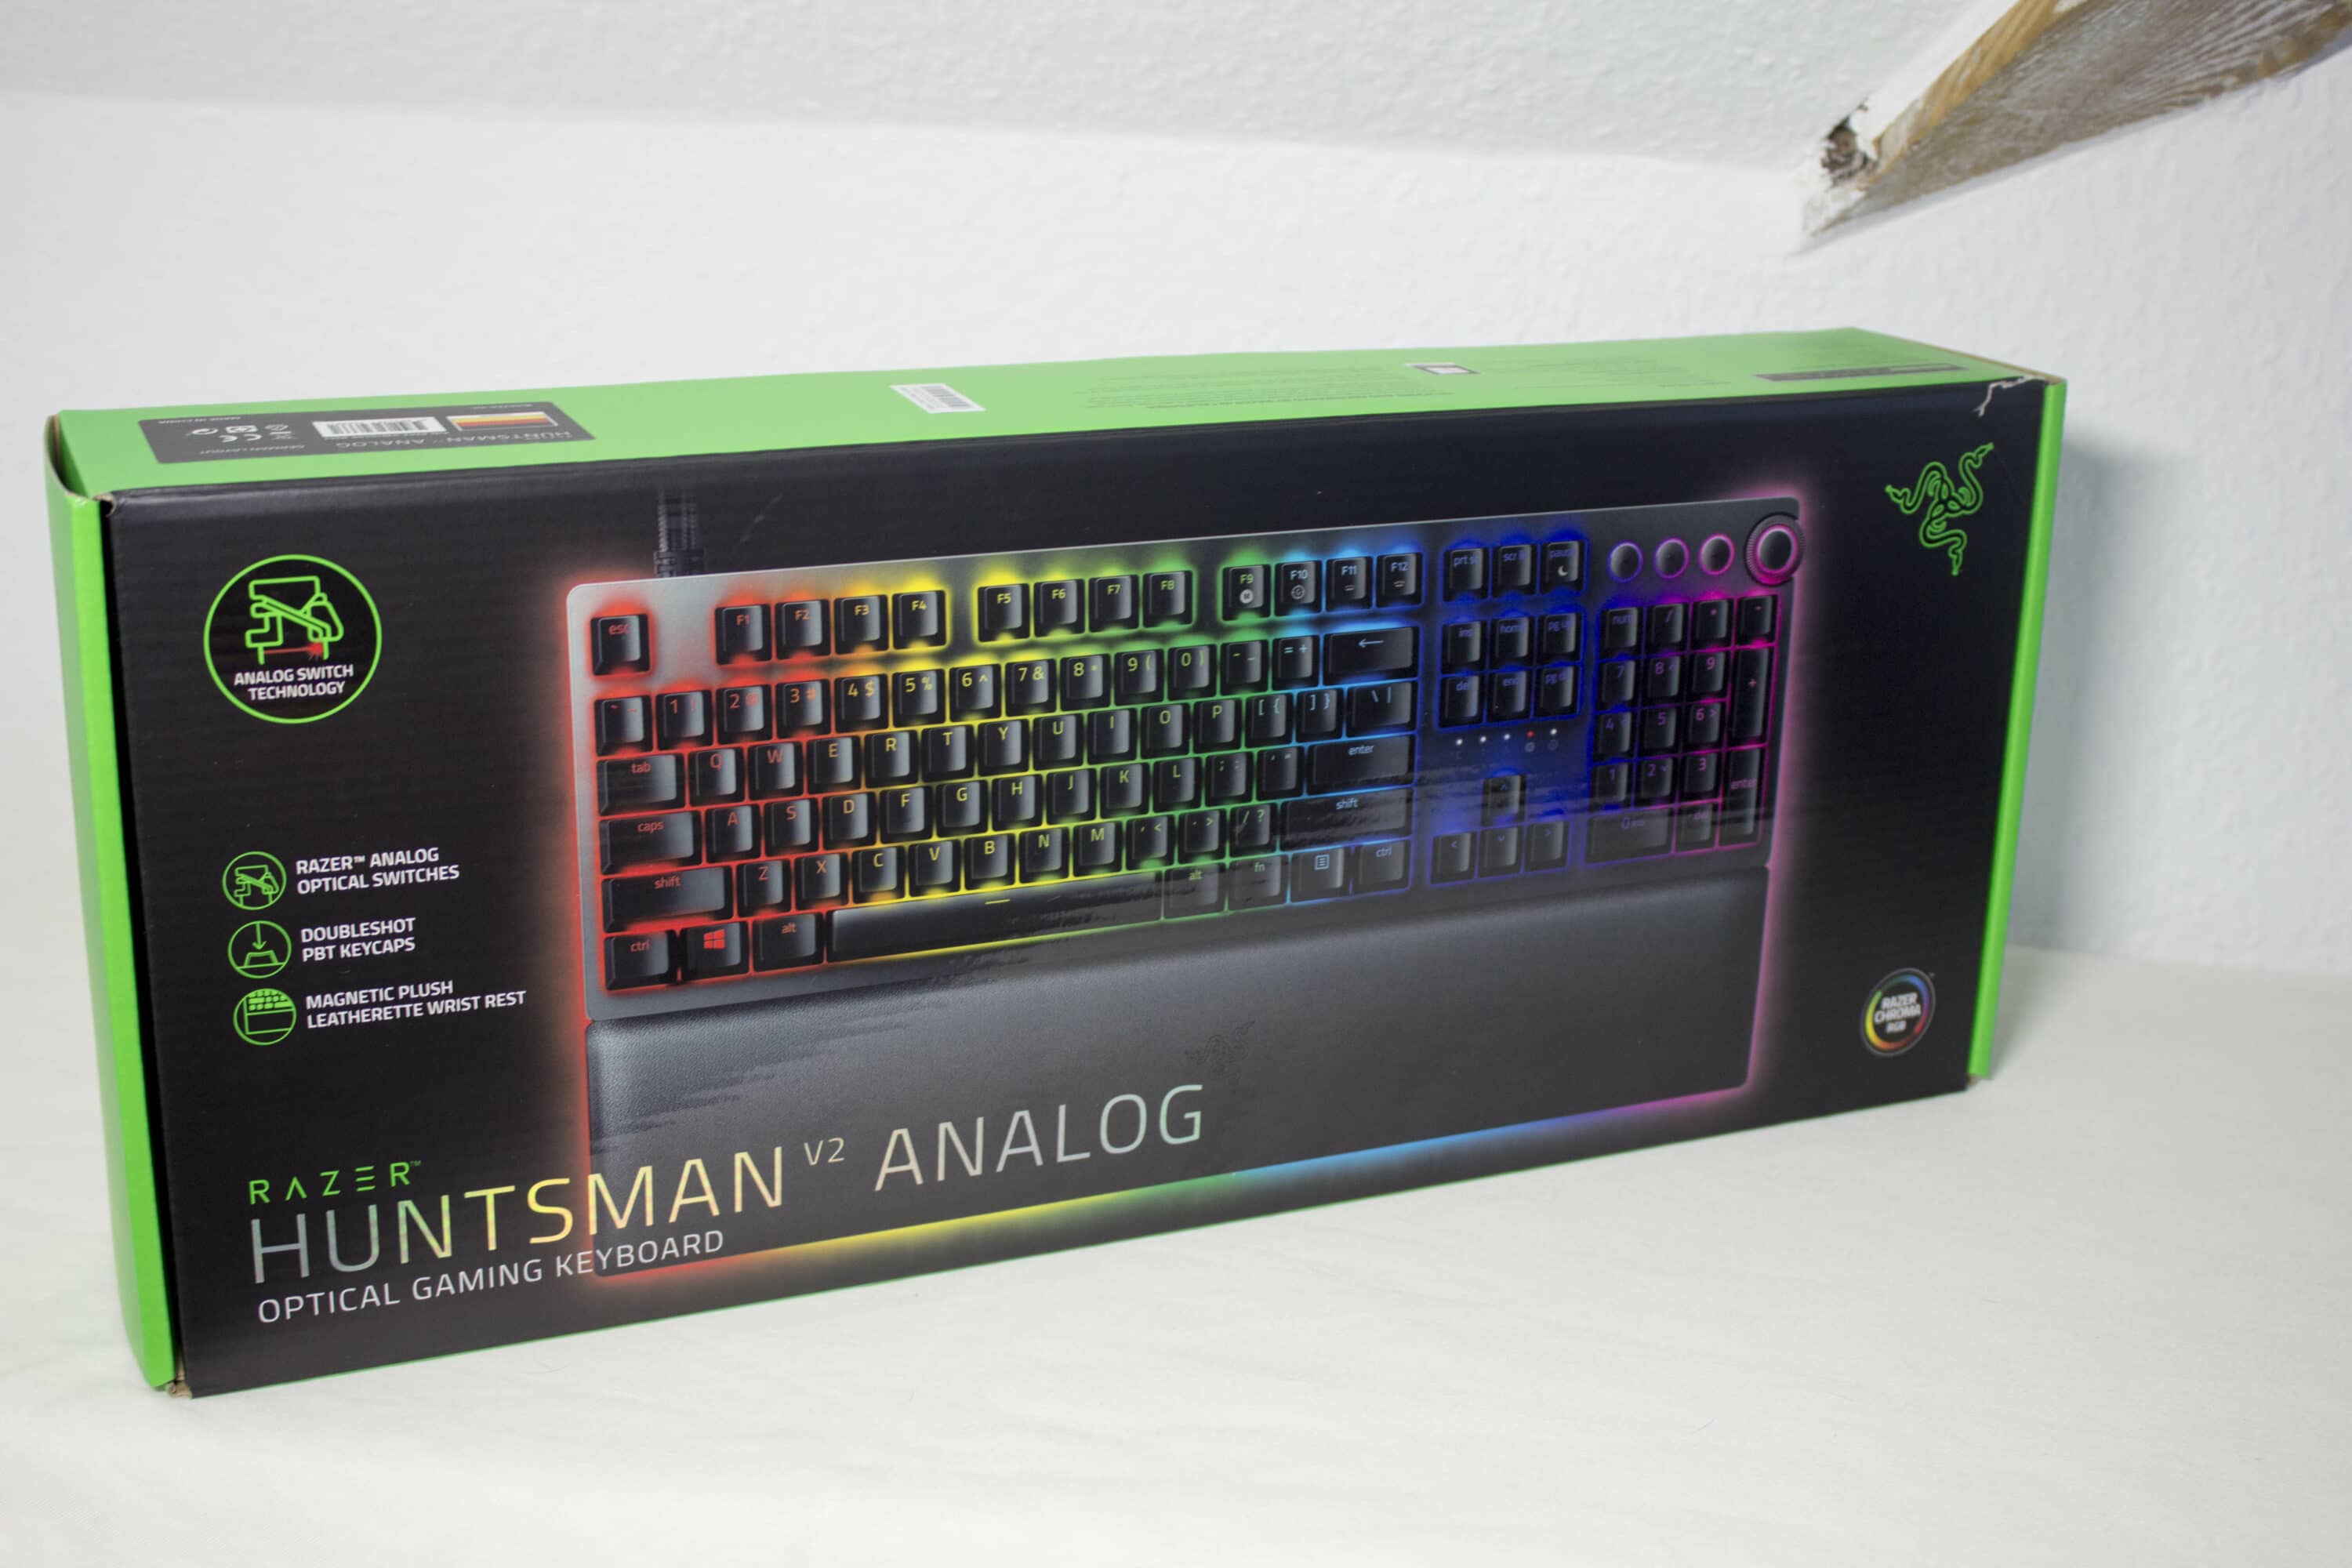 Razer Huntsman V2 Analog in review: What do controllers and keyboards have  in common?